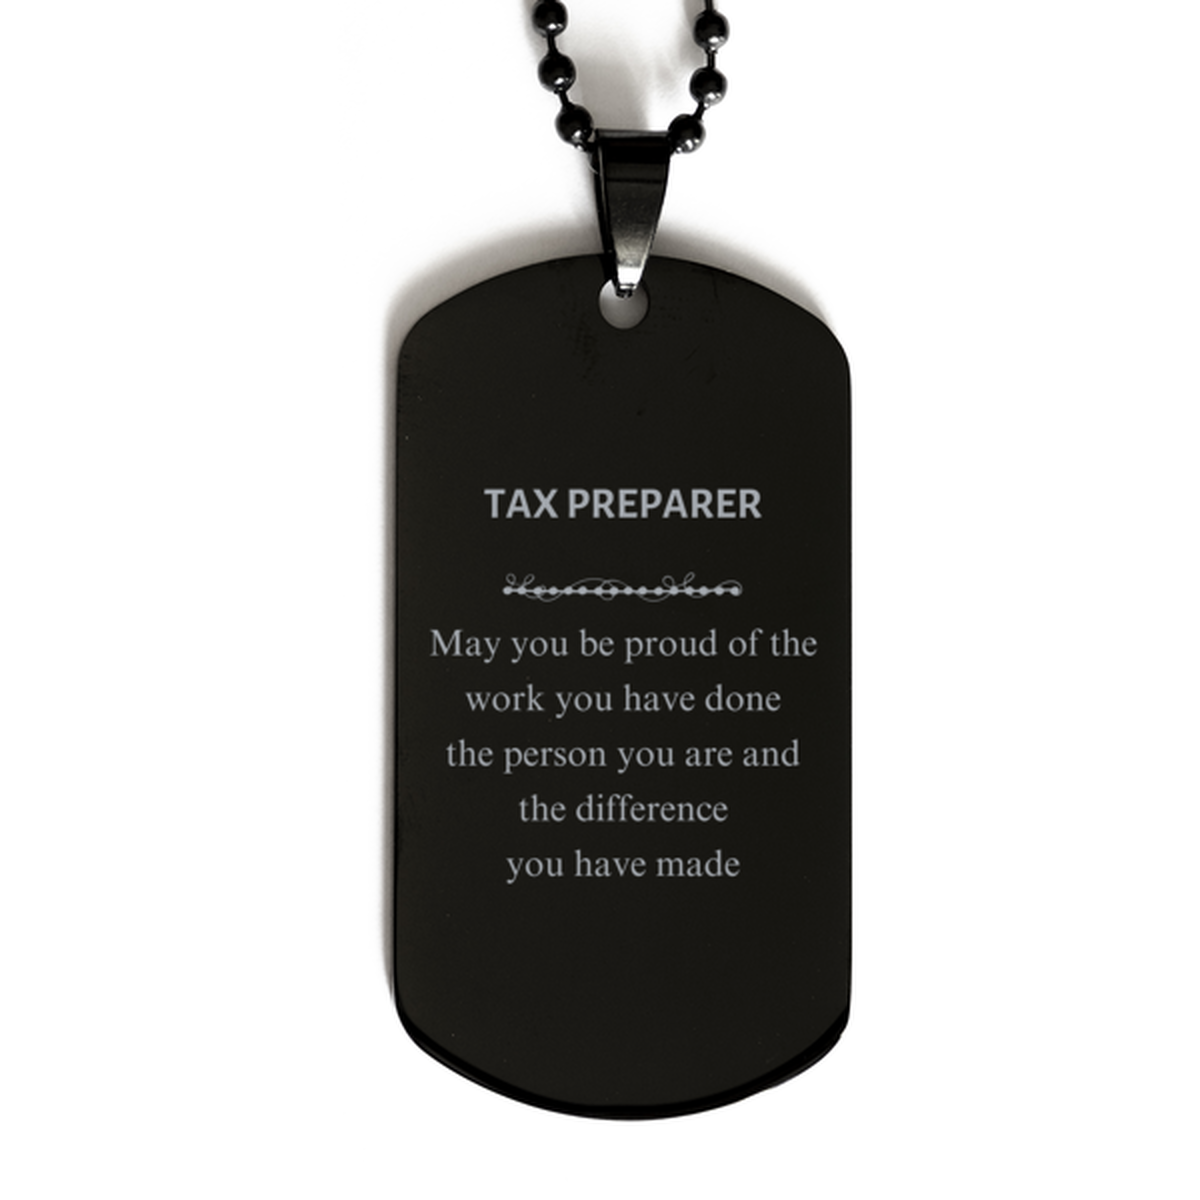 Tax Preparer May you be proud of the work you have done, Retirement Tax Preparer Black Dog Tag for Colleague Appreciation Gifts Amazing for Tax Preparer